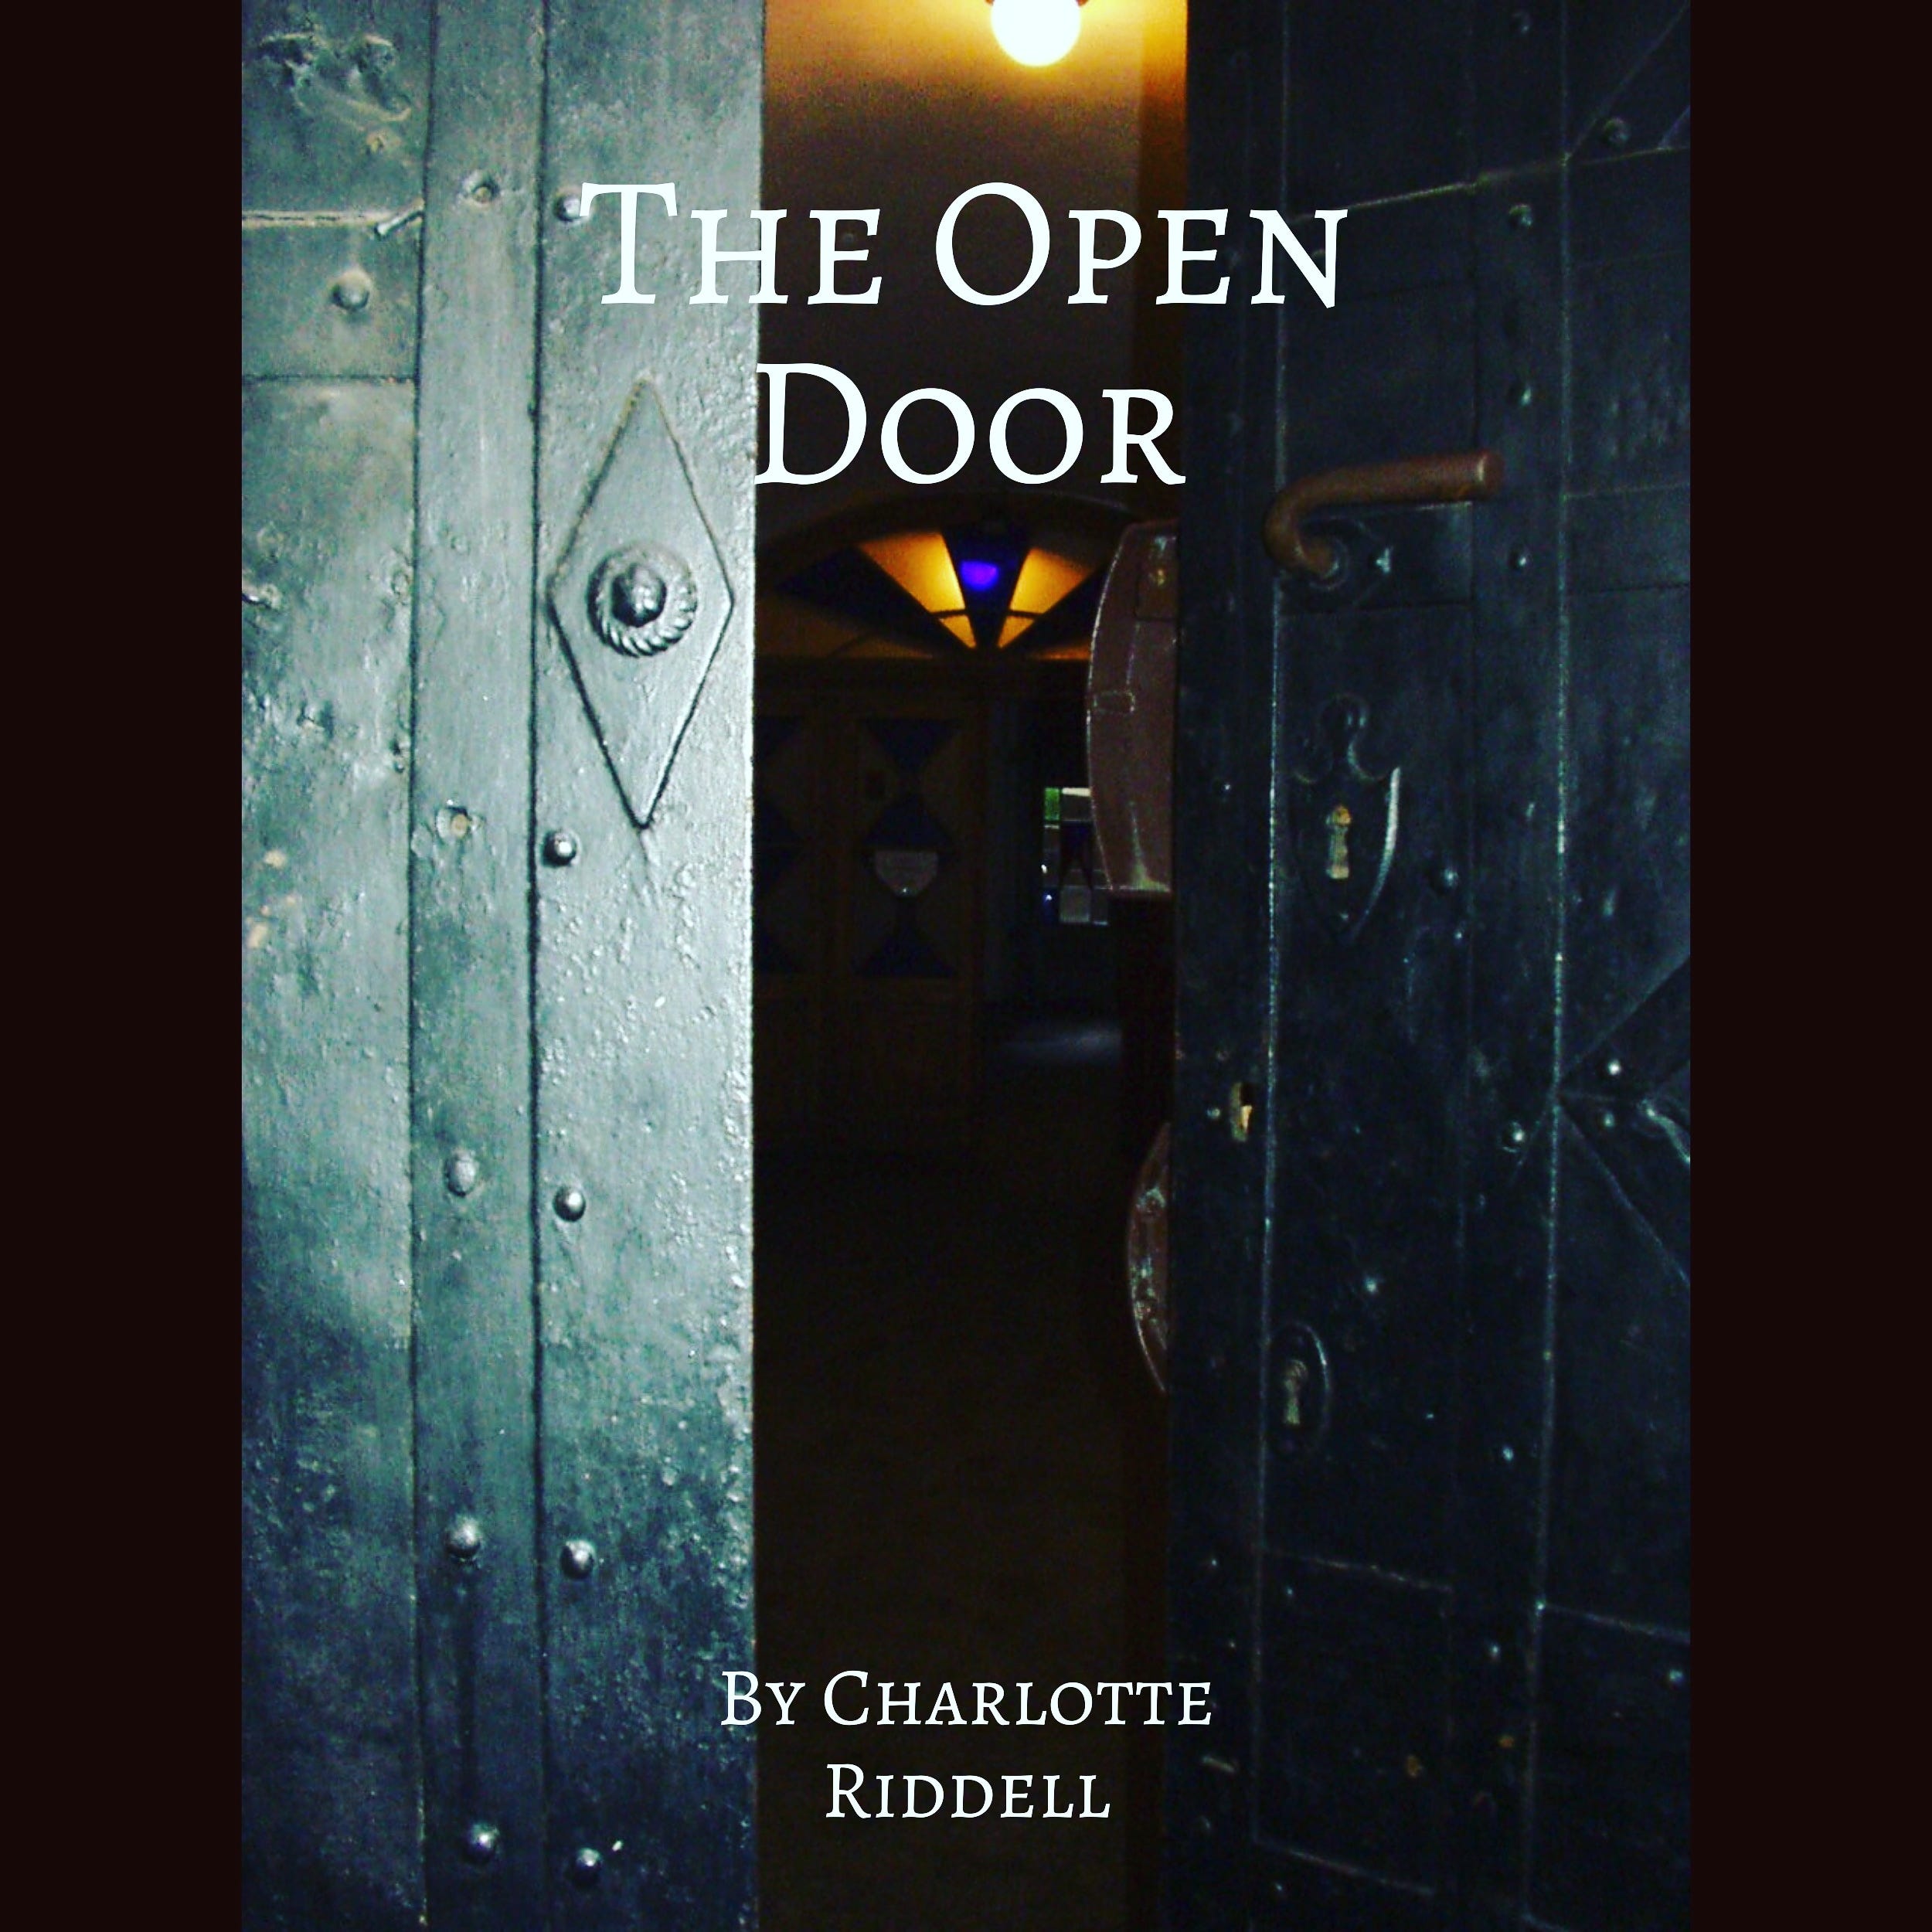 The Open Door by Charlotte Riddell